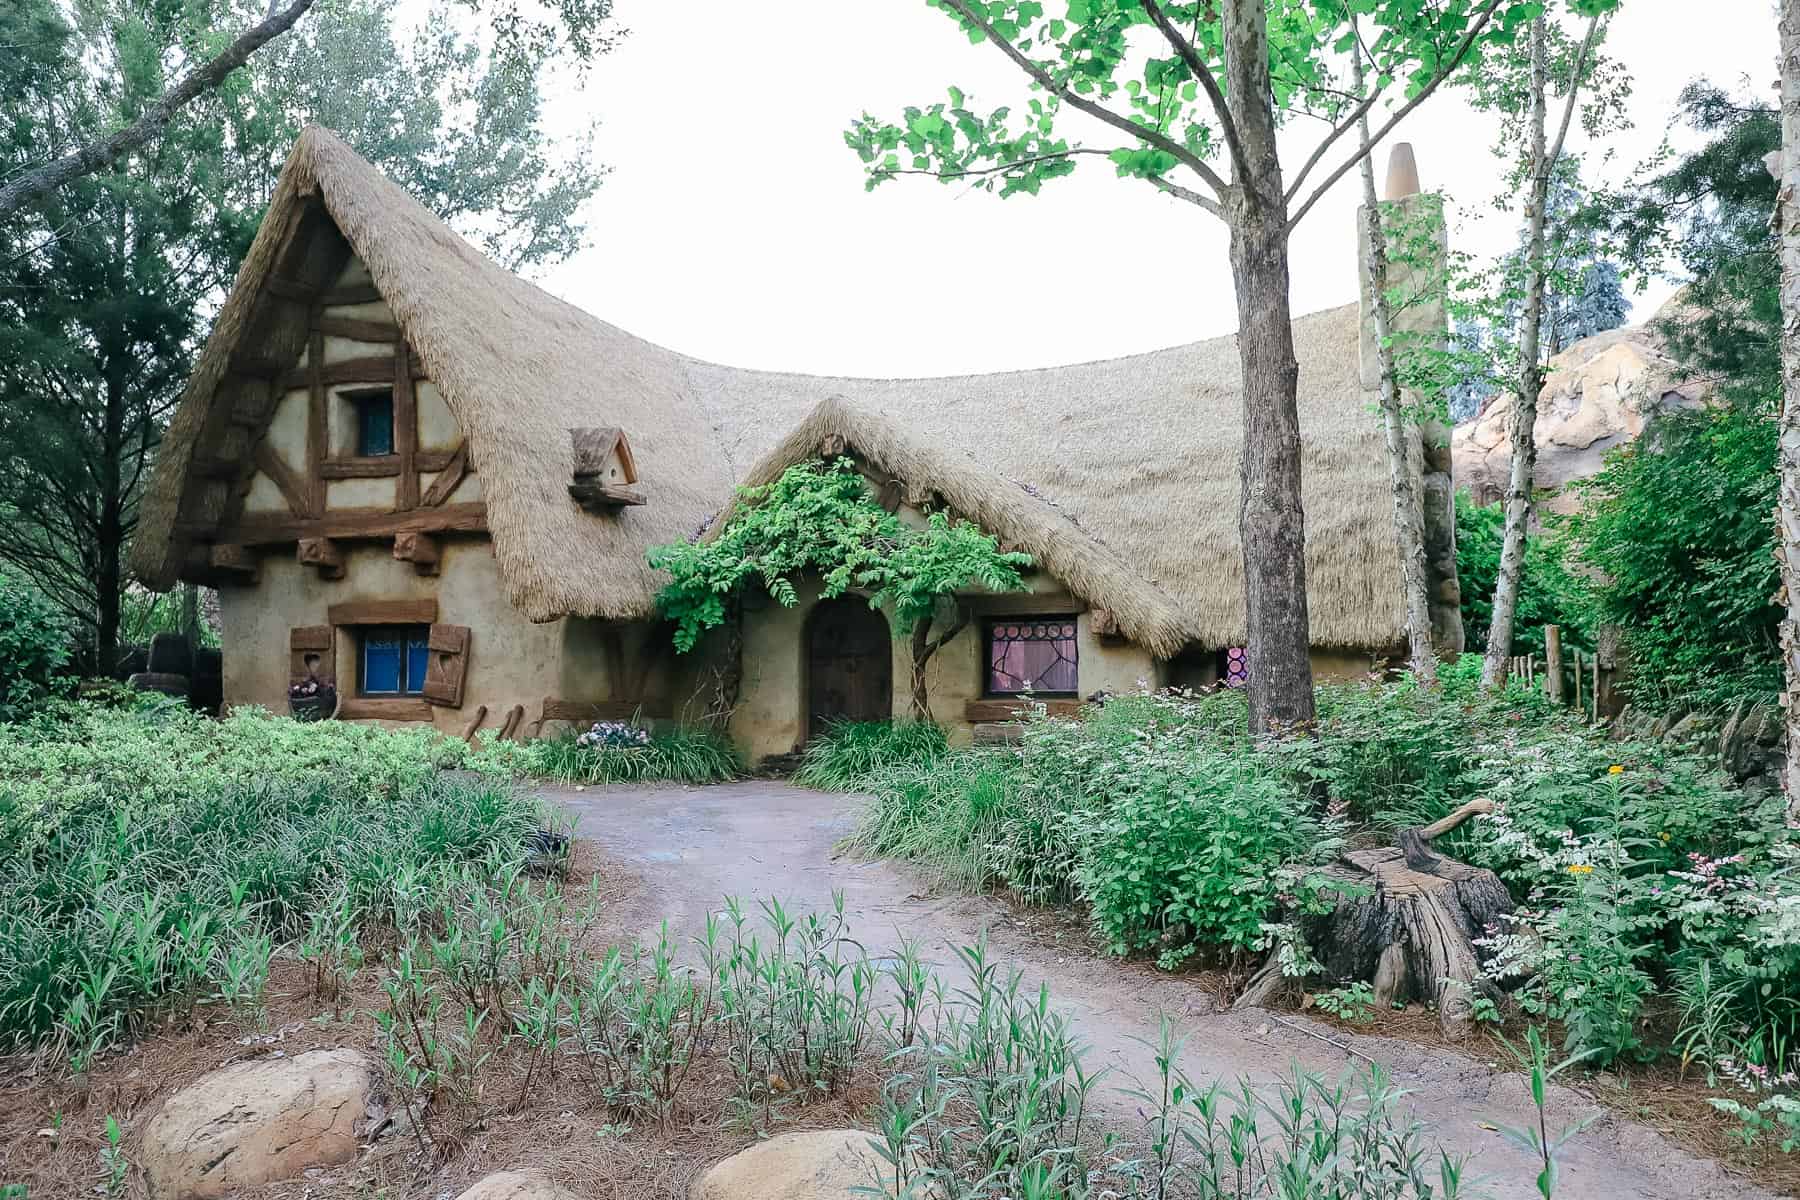 Guests can see the front of the Seven Dwarfs cottage when they exit the ride. 